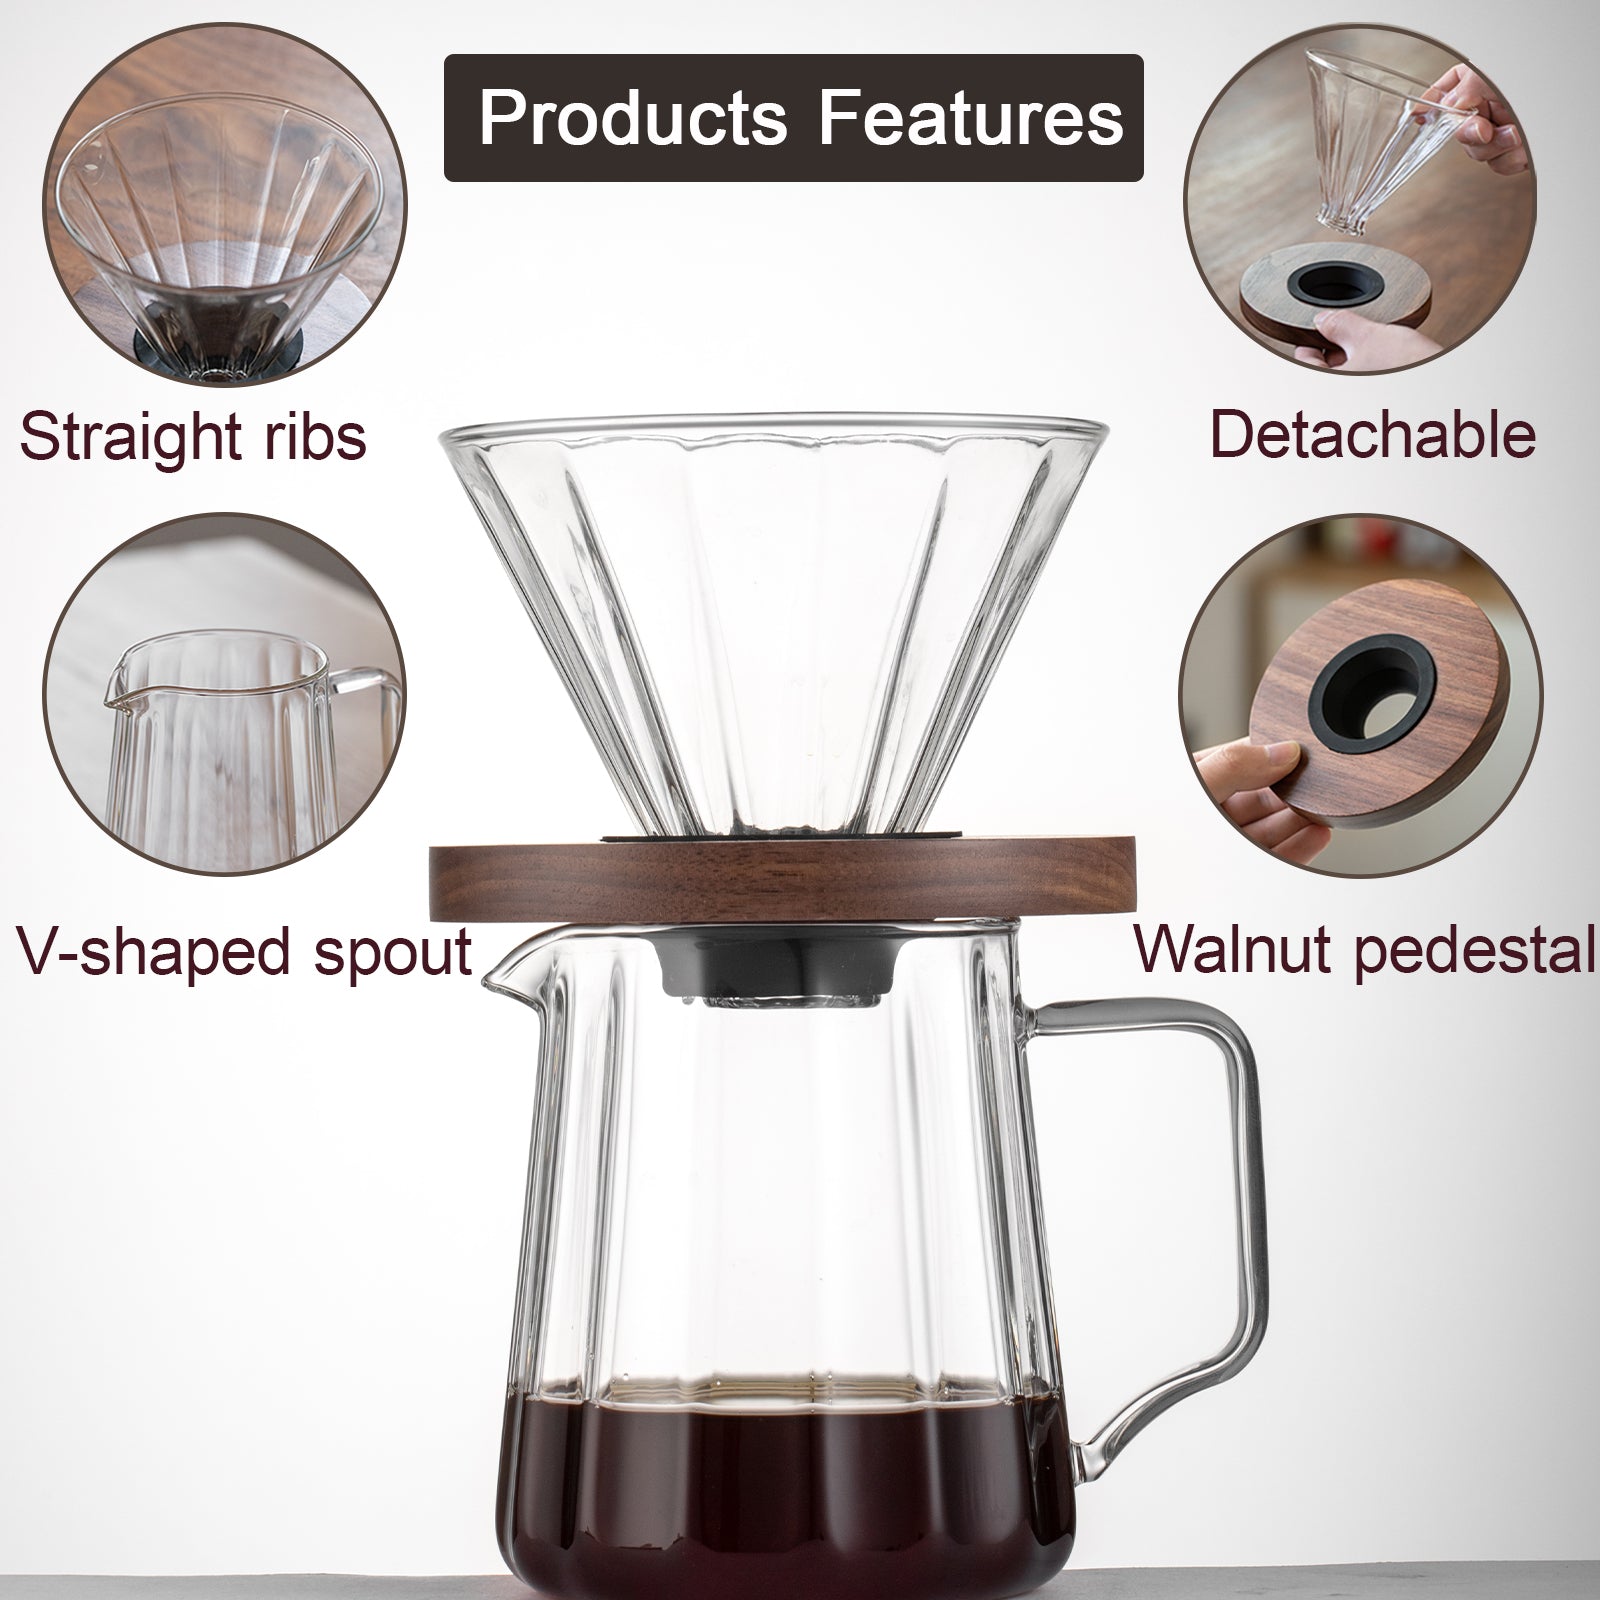 Puricon Pour Over Coffee Maker with V60 Paper Filter 40 Sheets, Holds 1 to  2 Cups, 15oz Coffee Dripper Set Borosilicate Glass Coffee Carafe Brewer